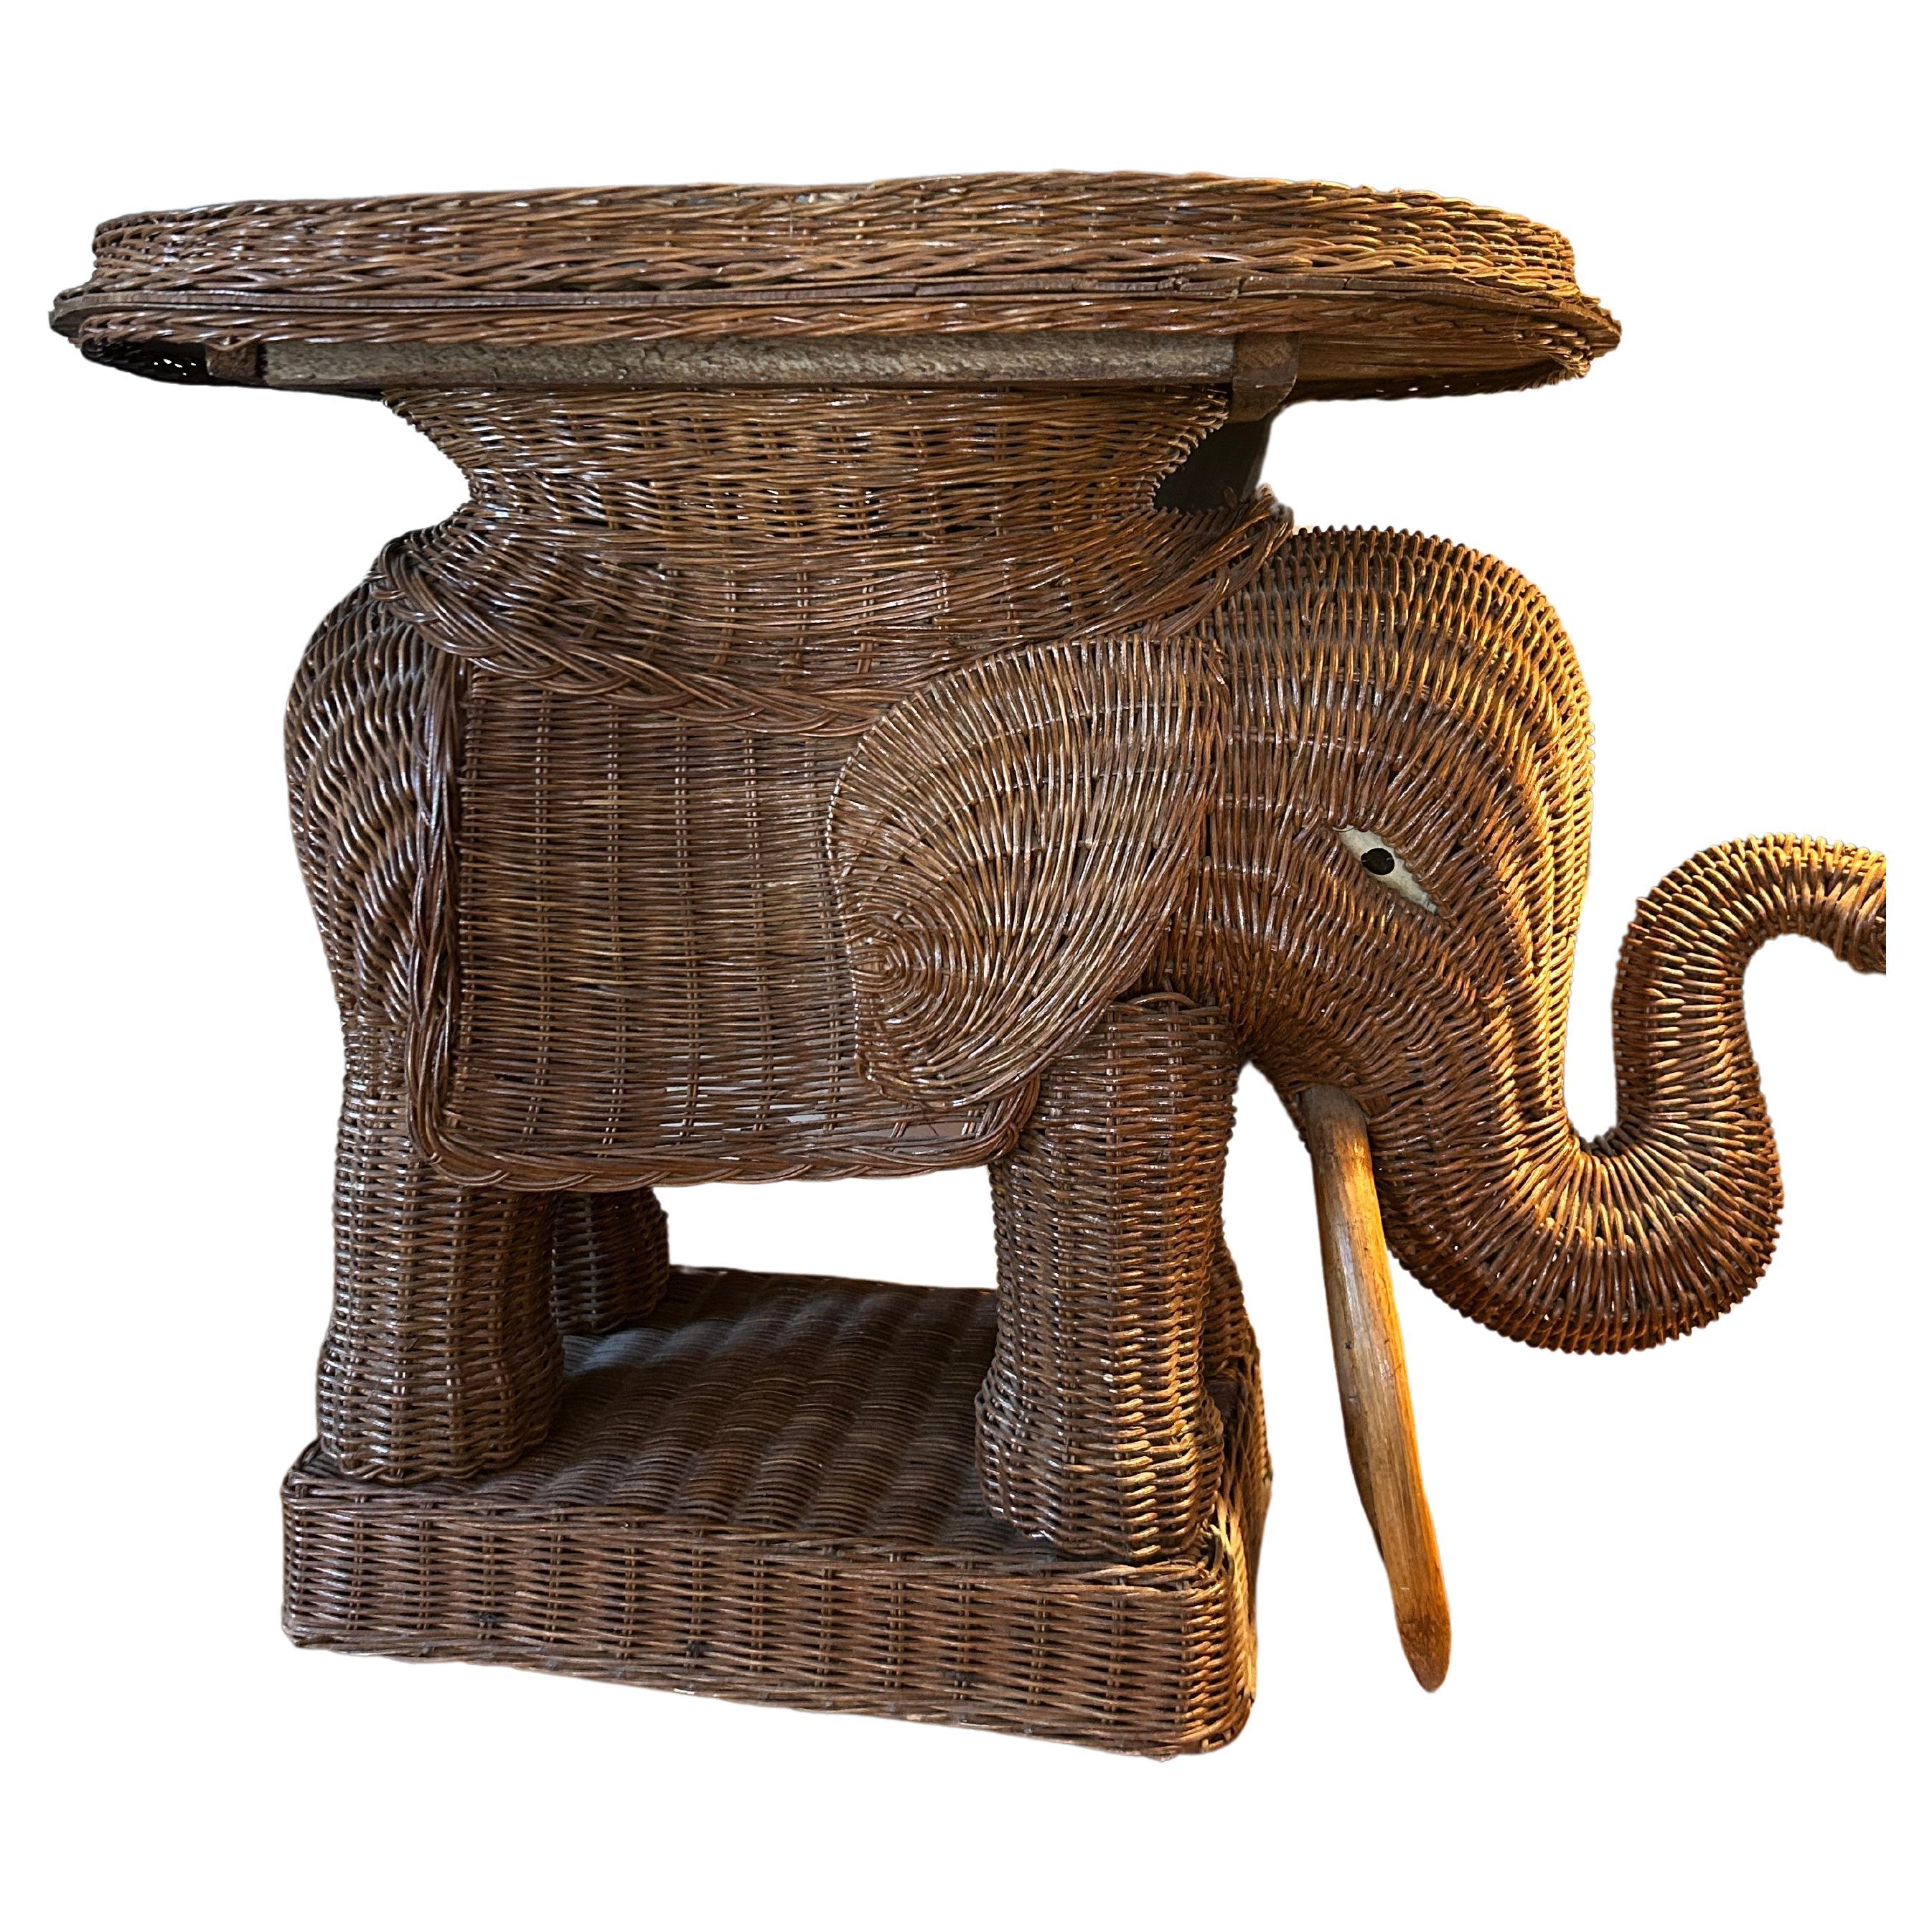 Elephant table in rattan in the Vivaï del Sud style, Italy 1970